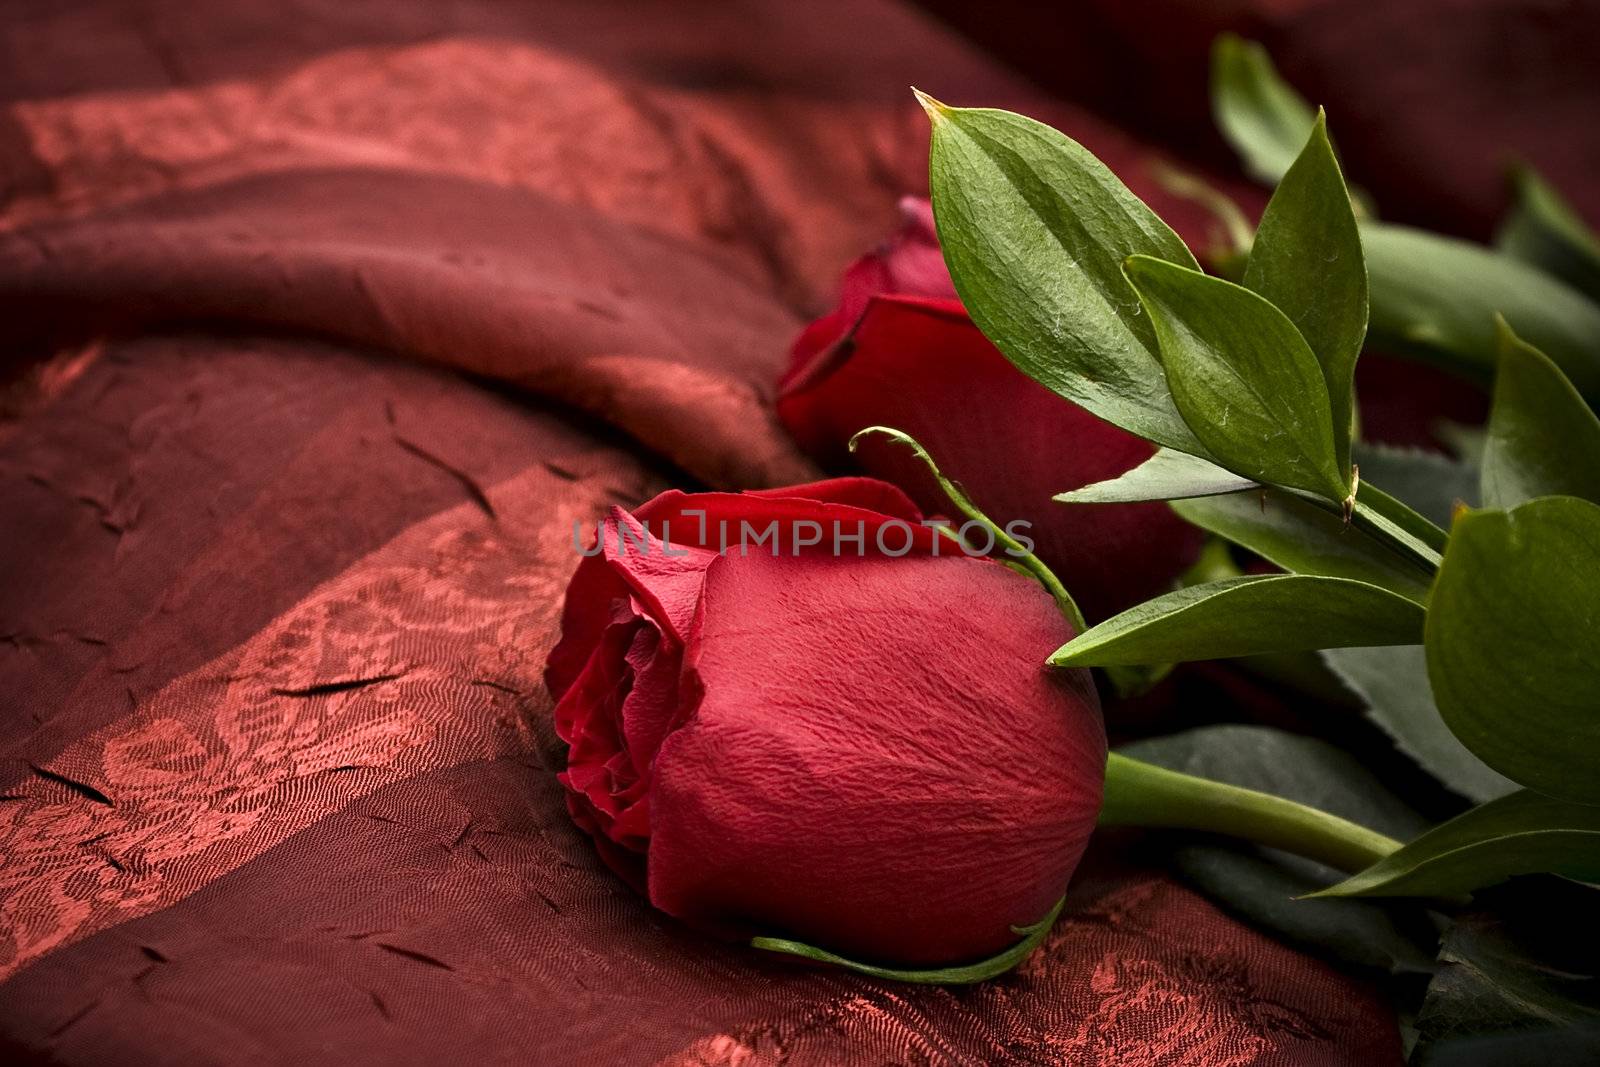 Beautiful red rose against a red background

